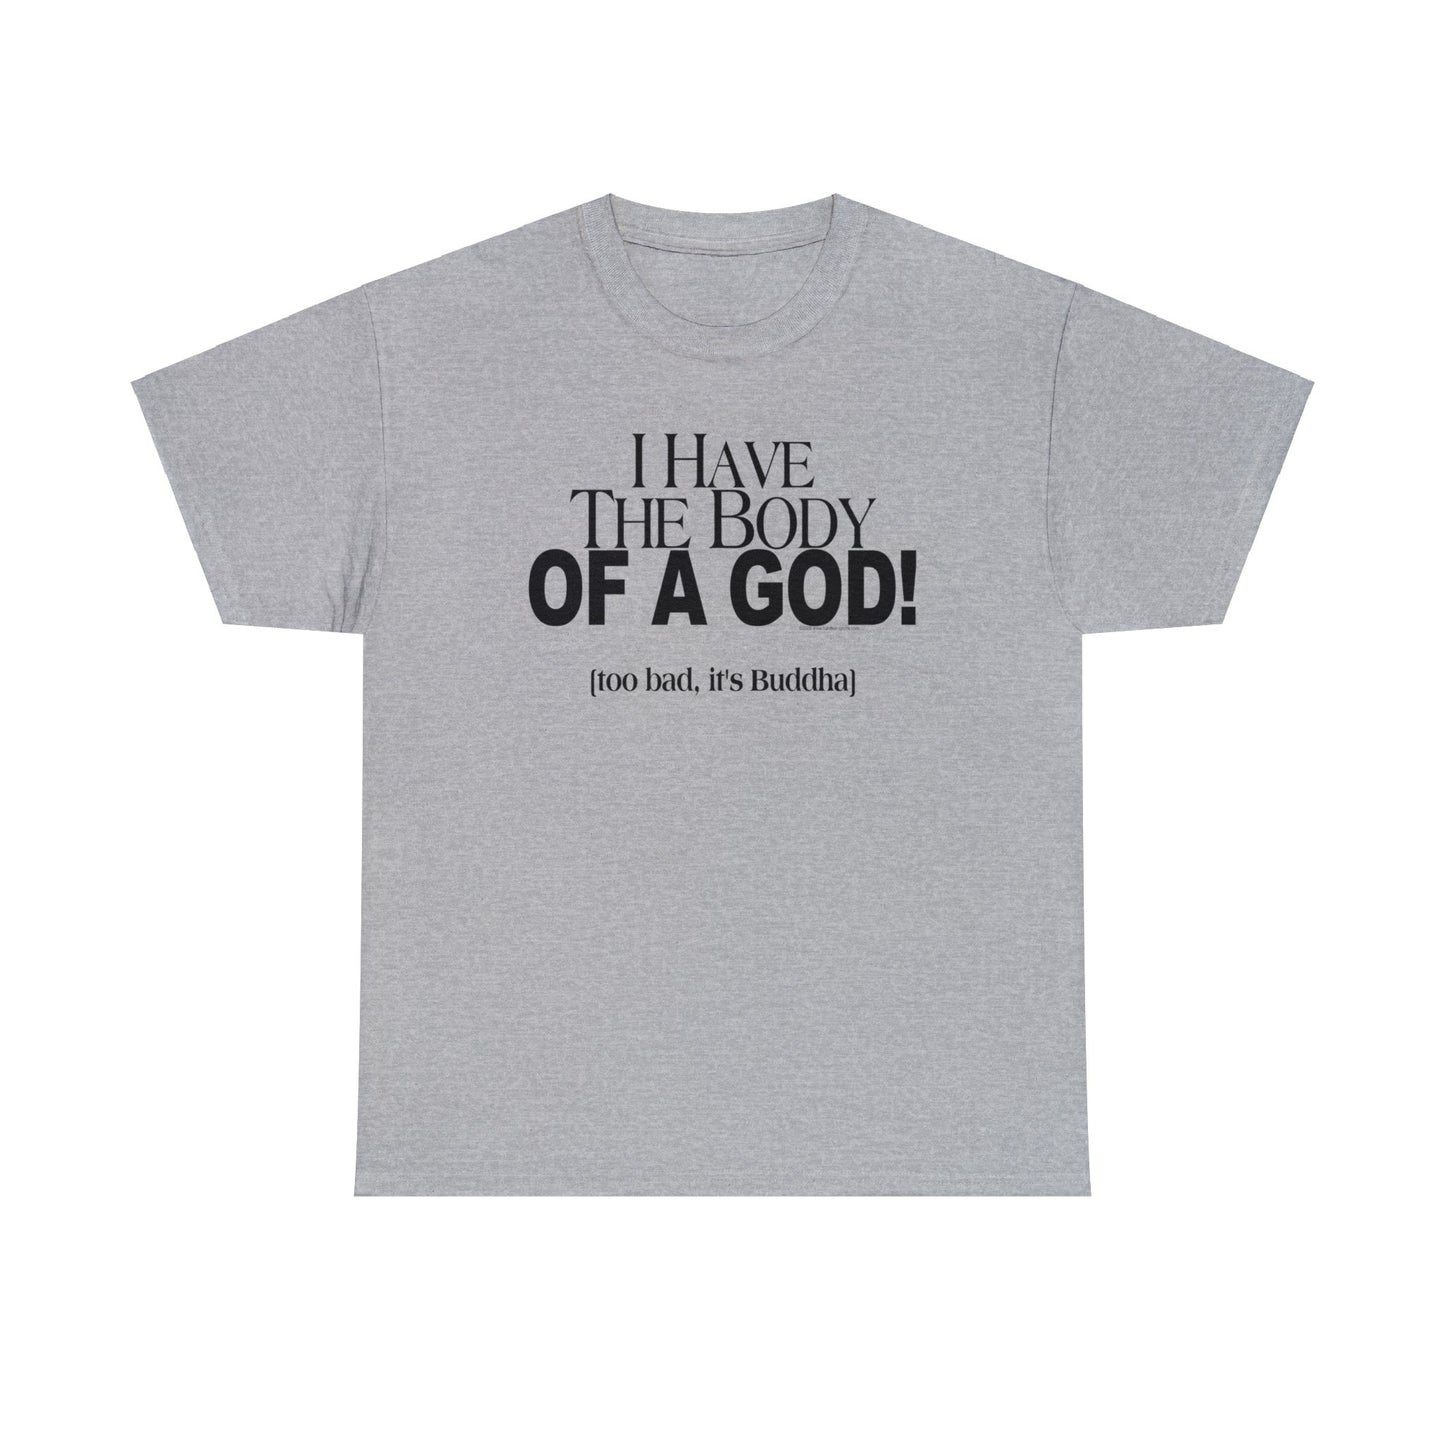 I have the Body of a God, Too bad it's Buddah funny t-shirt, humorous t-shirt, ironic t-shirt, t-shirt gift